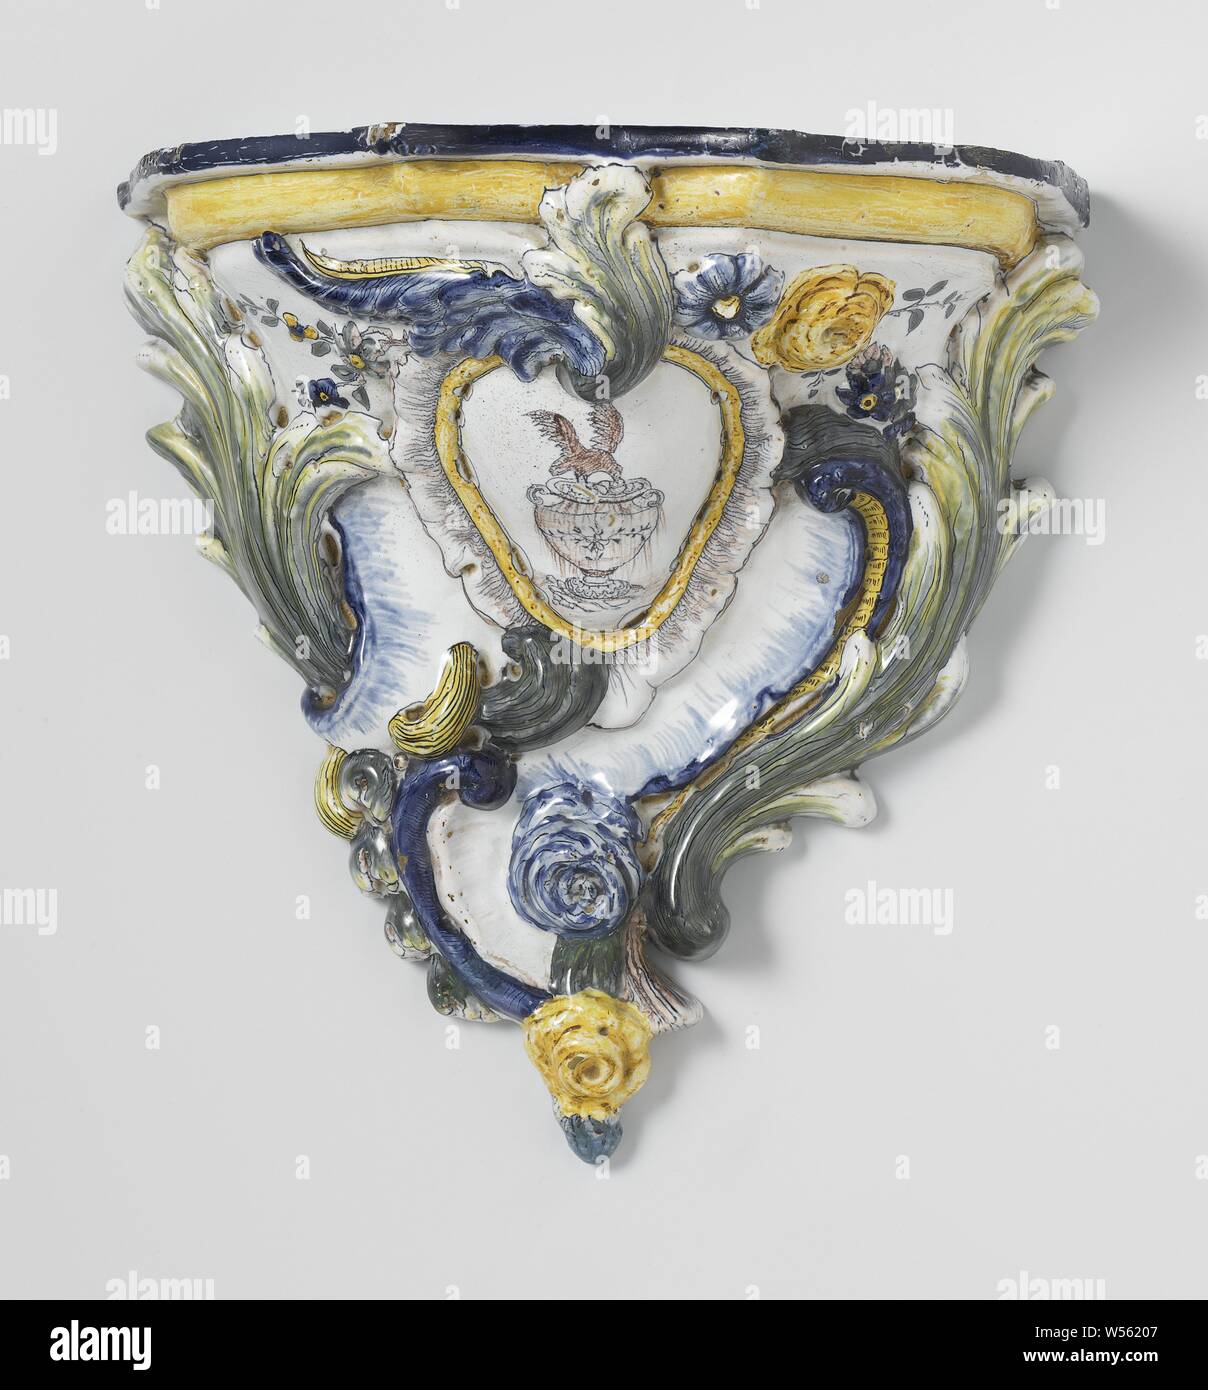 Console, multi-colored with bird picking fruit from a vase, Console with multi-colored faience. In a inverted pear-shaped medallion in relief a bird is painted that picks fruit from a vase. Leaves and flowers are modeled in relief around the medallion. The console is painted in the colors blue, green, yellow and purple., anonymous, West-Europa, c. 1775 - c. 1850, earthenware, tin glaze, h 29.0 cm × w 29.0 cm × d 16.0 cm Stock Photo